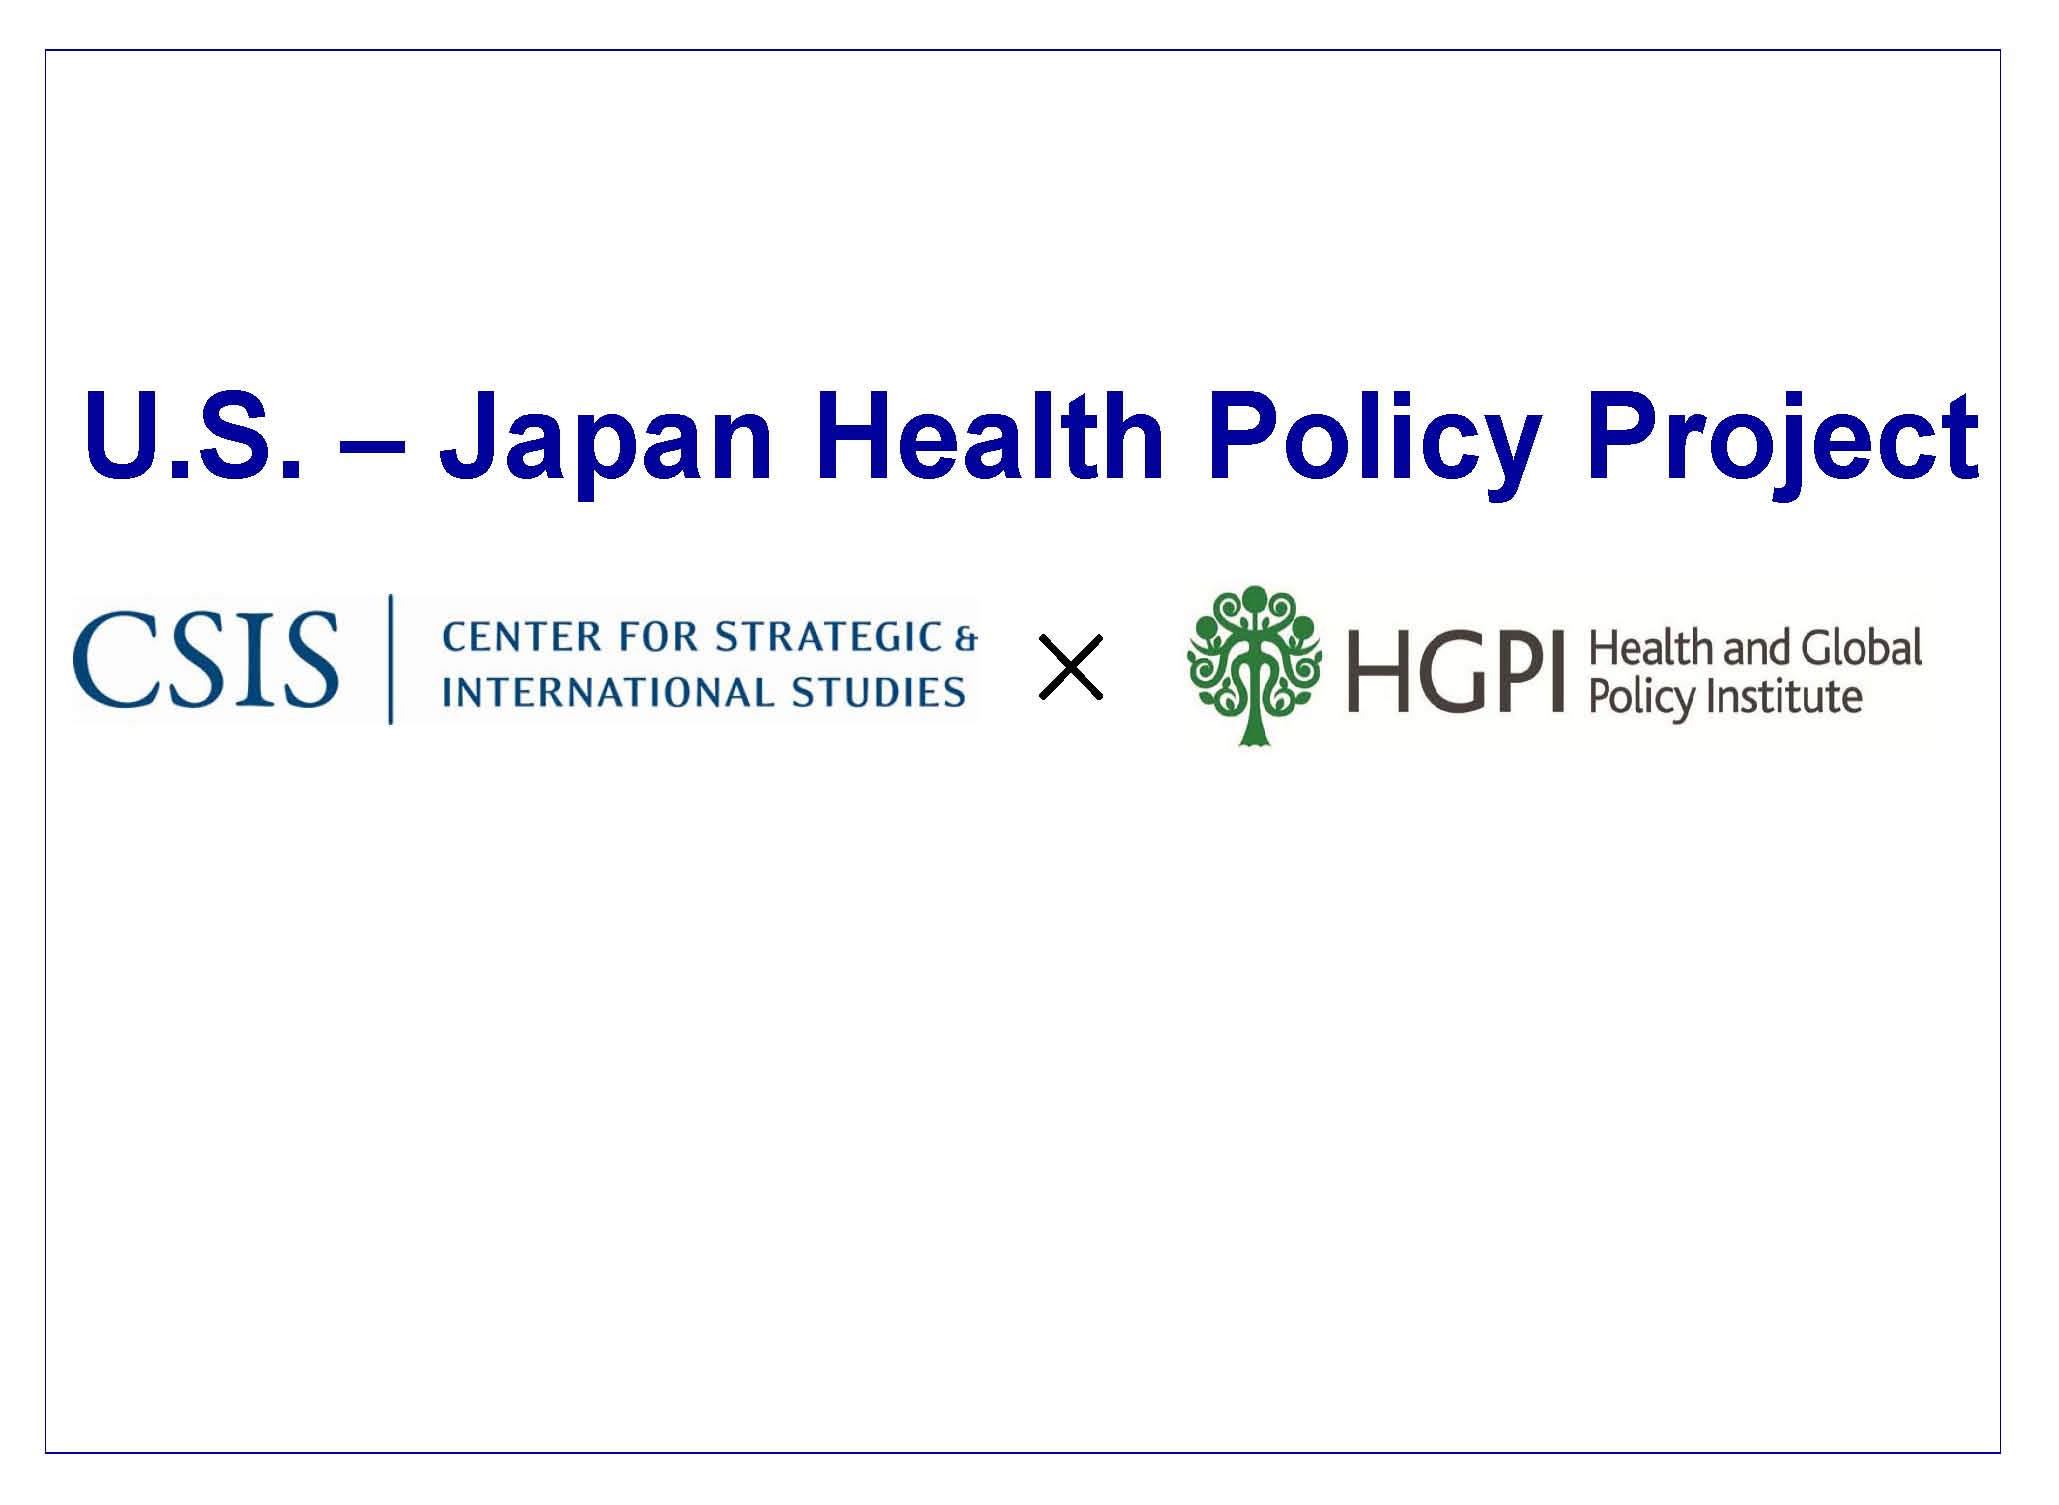 CSIS /HGPI “U.S.-Japan Health Policy Project” Policy Recommendation